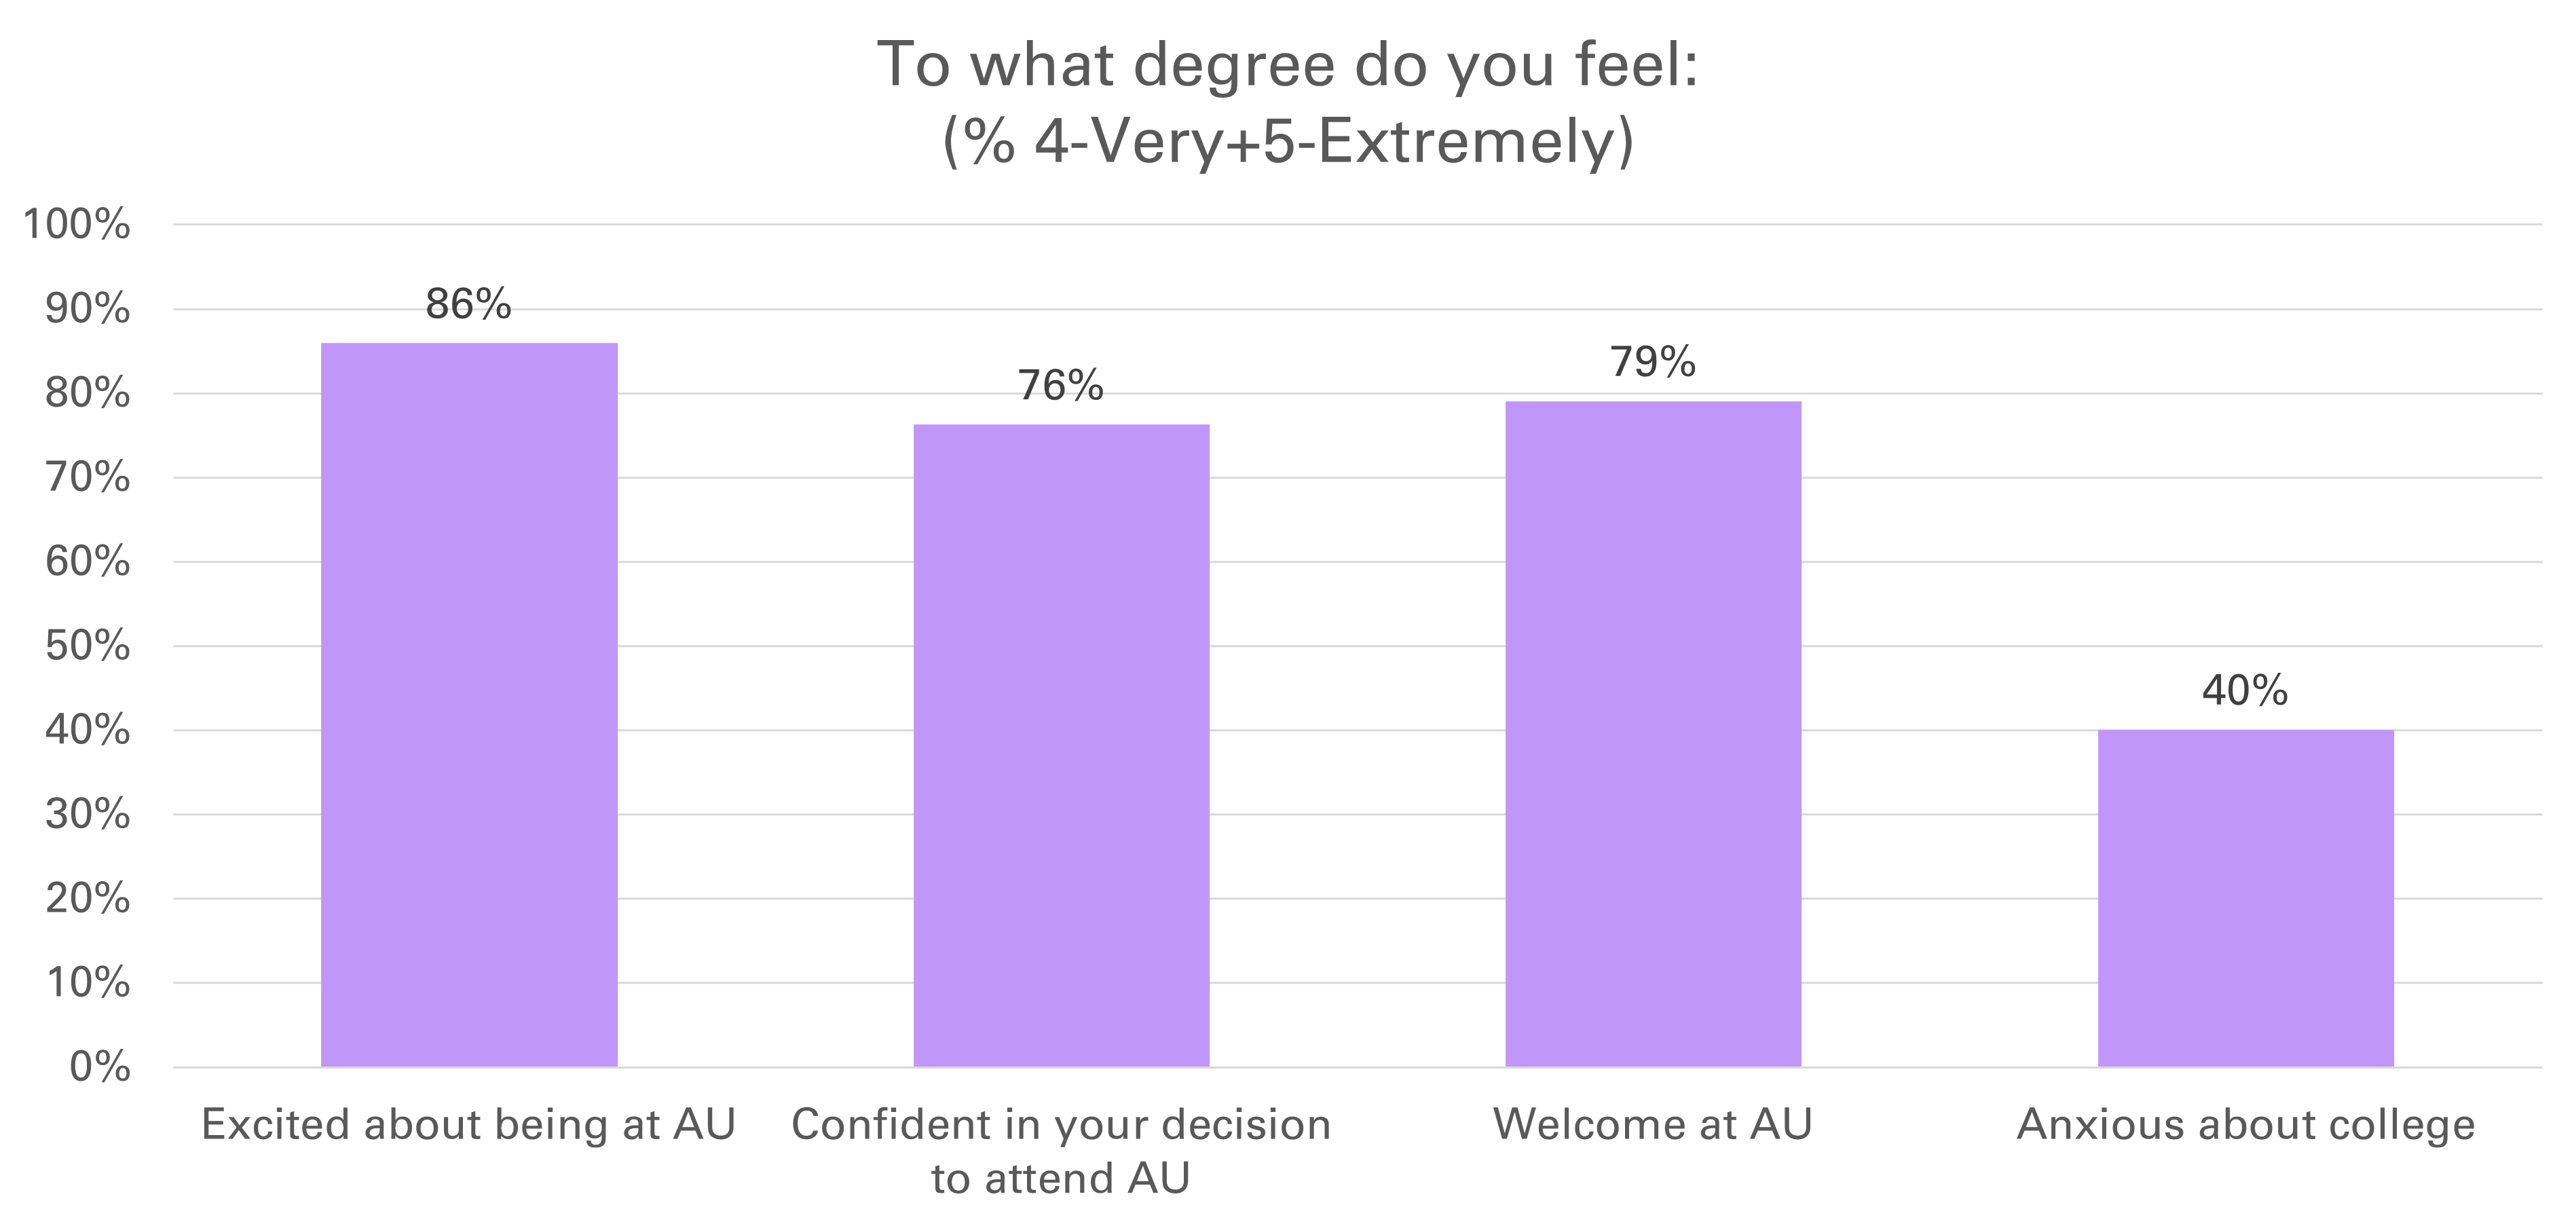 Summer Transition Survey - Initial Feelings about AU